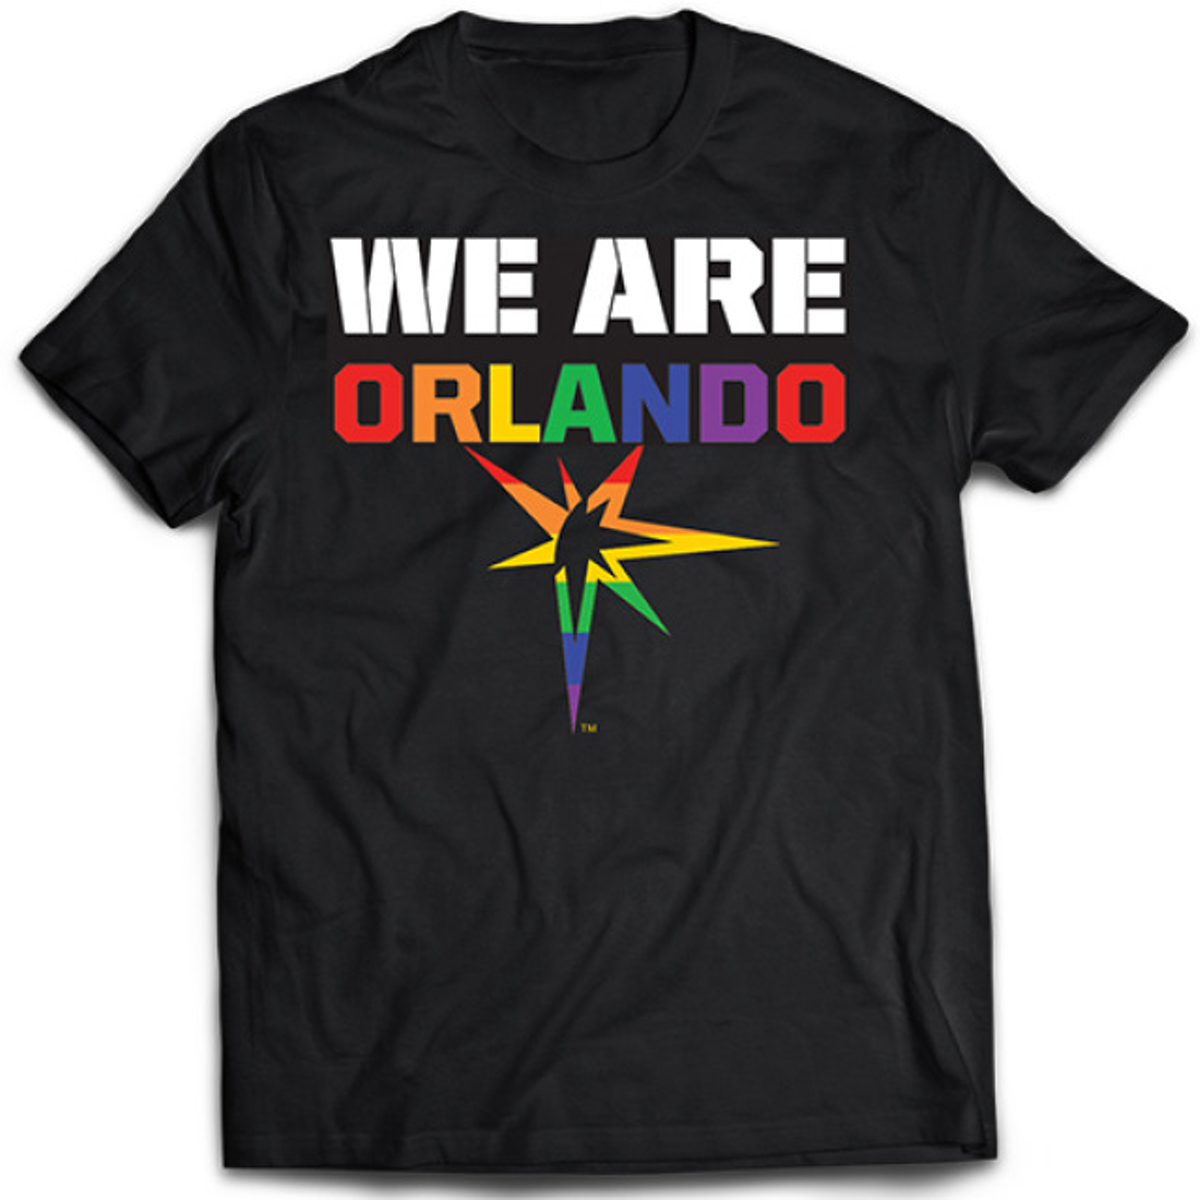 The Rays gave remaining t-shirts from the Pulse fundraiser to the Tampa International Gay & Lesbian Film Festival.